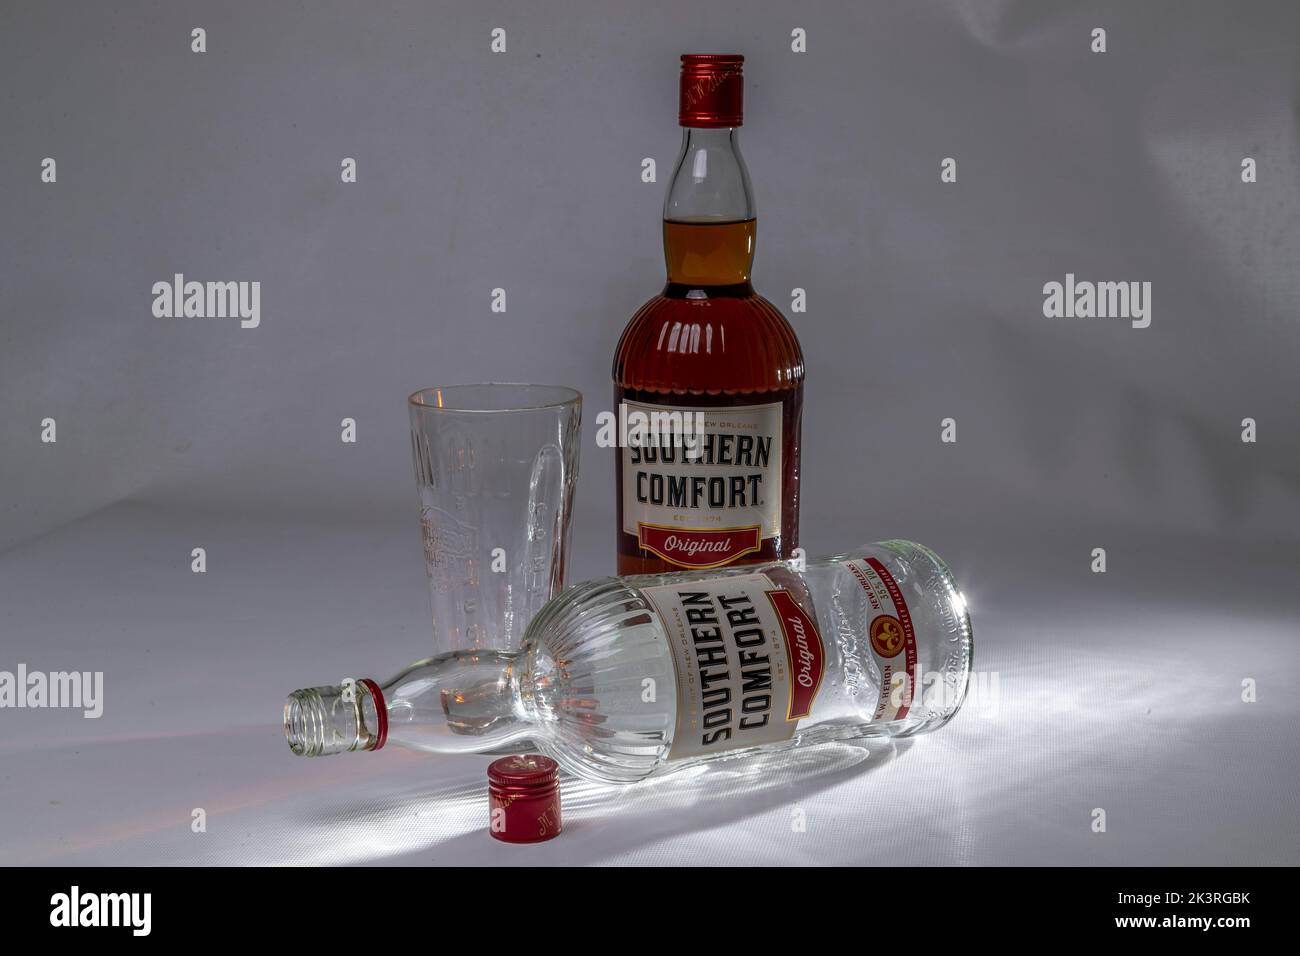 Studio shot of a full and empty bottle of Southern Comfort on a plain background. Stock Photo